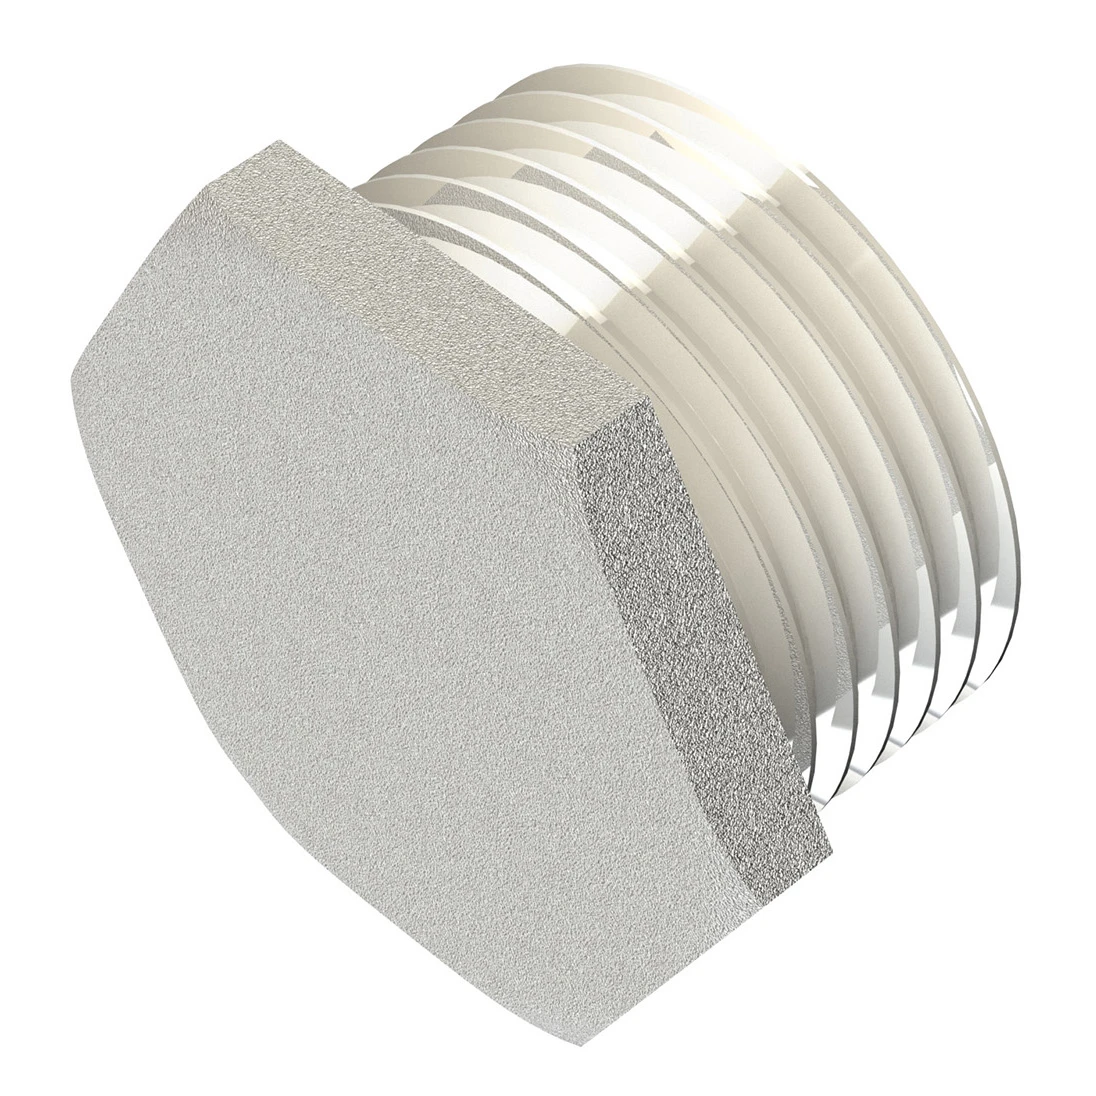 PACK OF 5 20mm Galvanised Stopping Plugs 